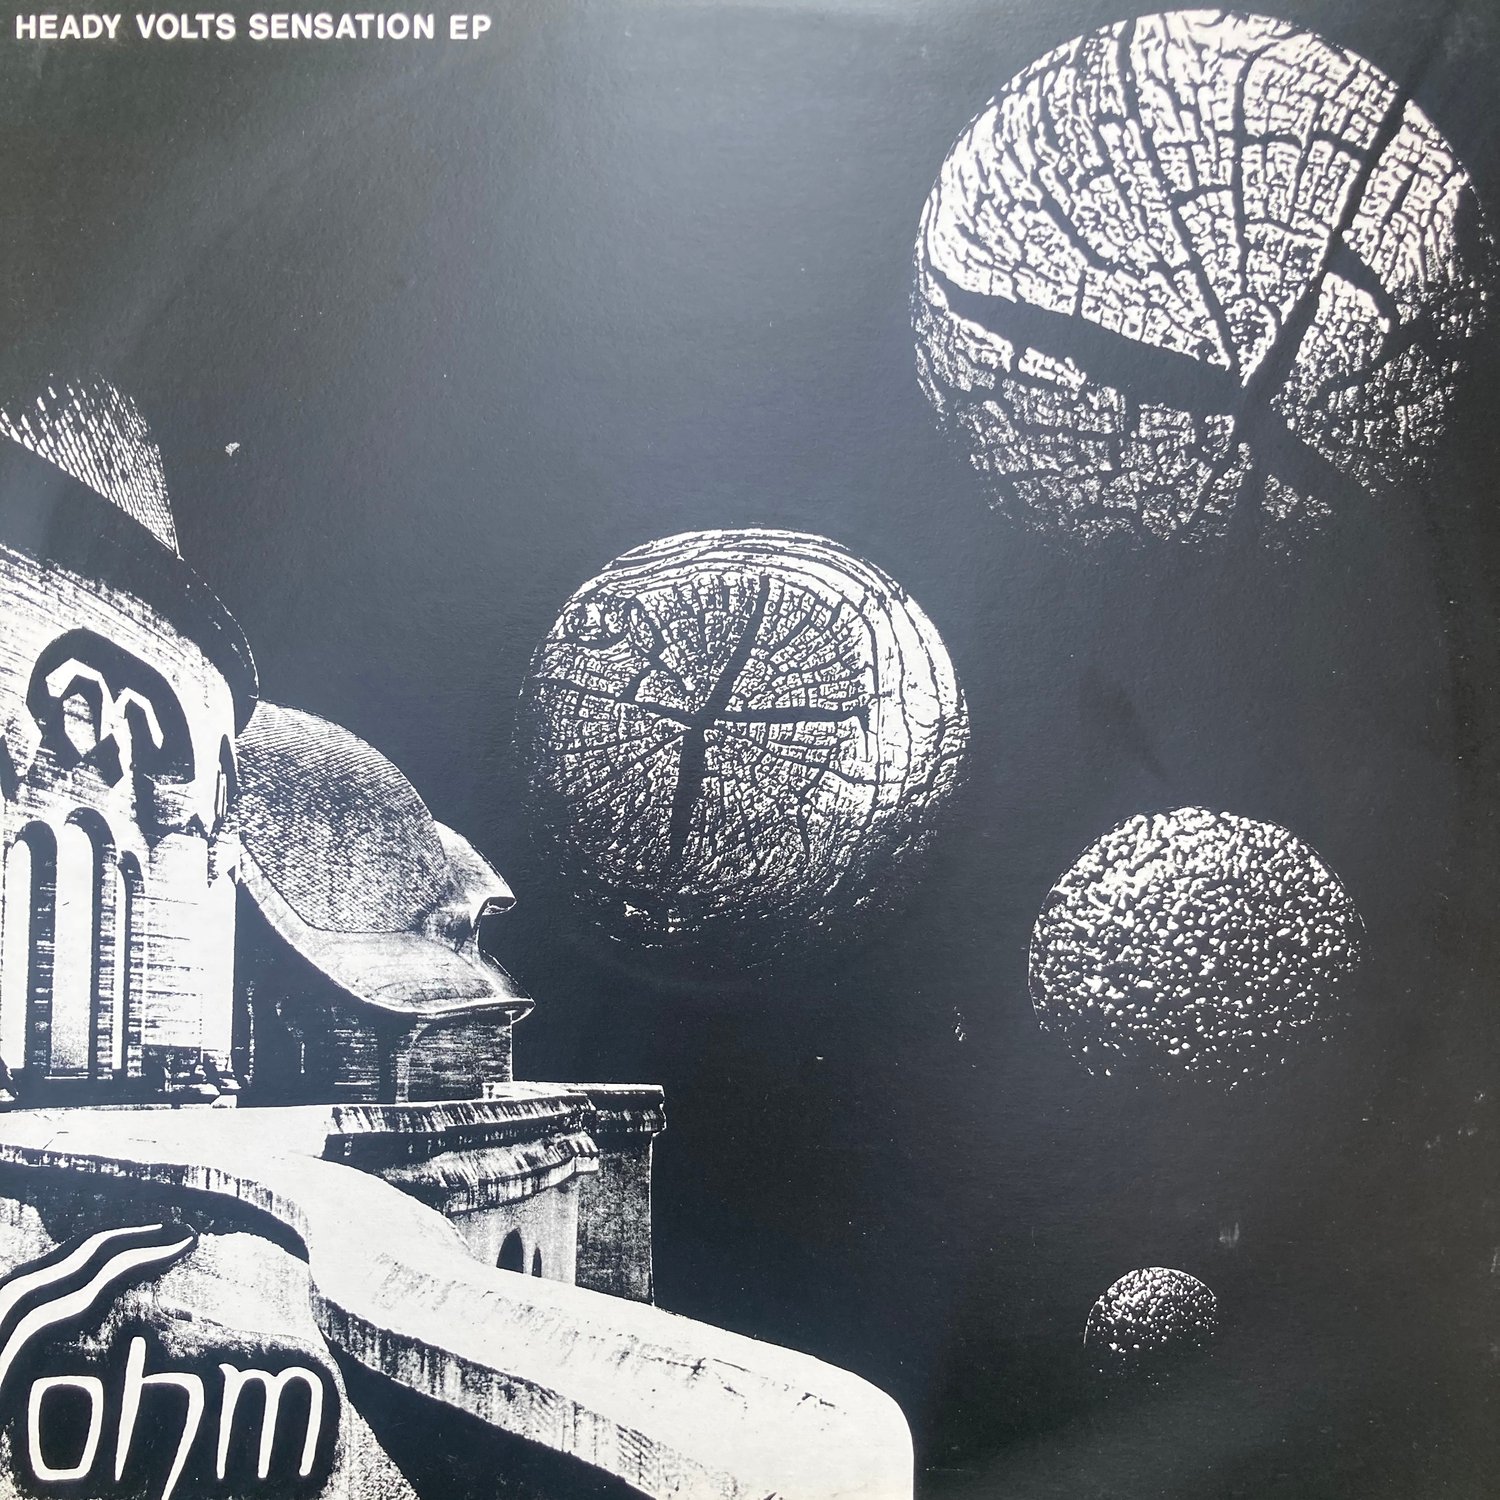 Image of Ohm - Heady Volts EP